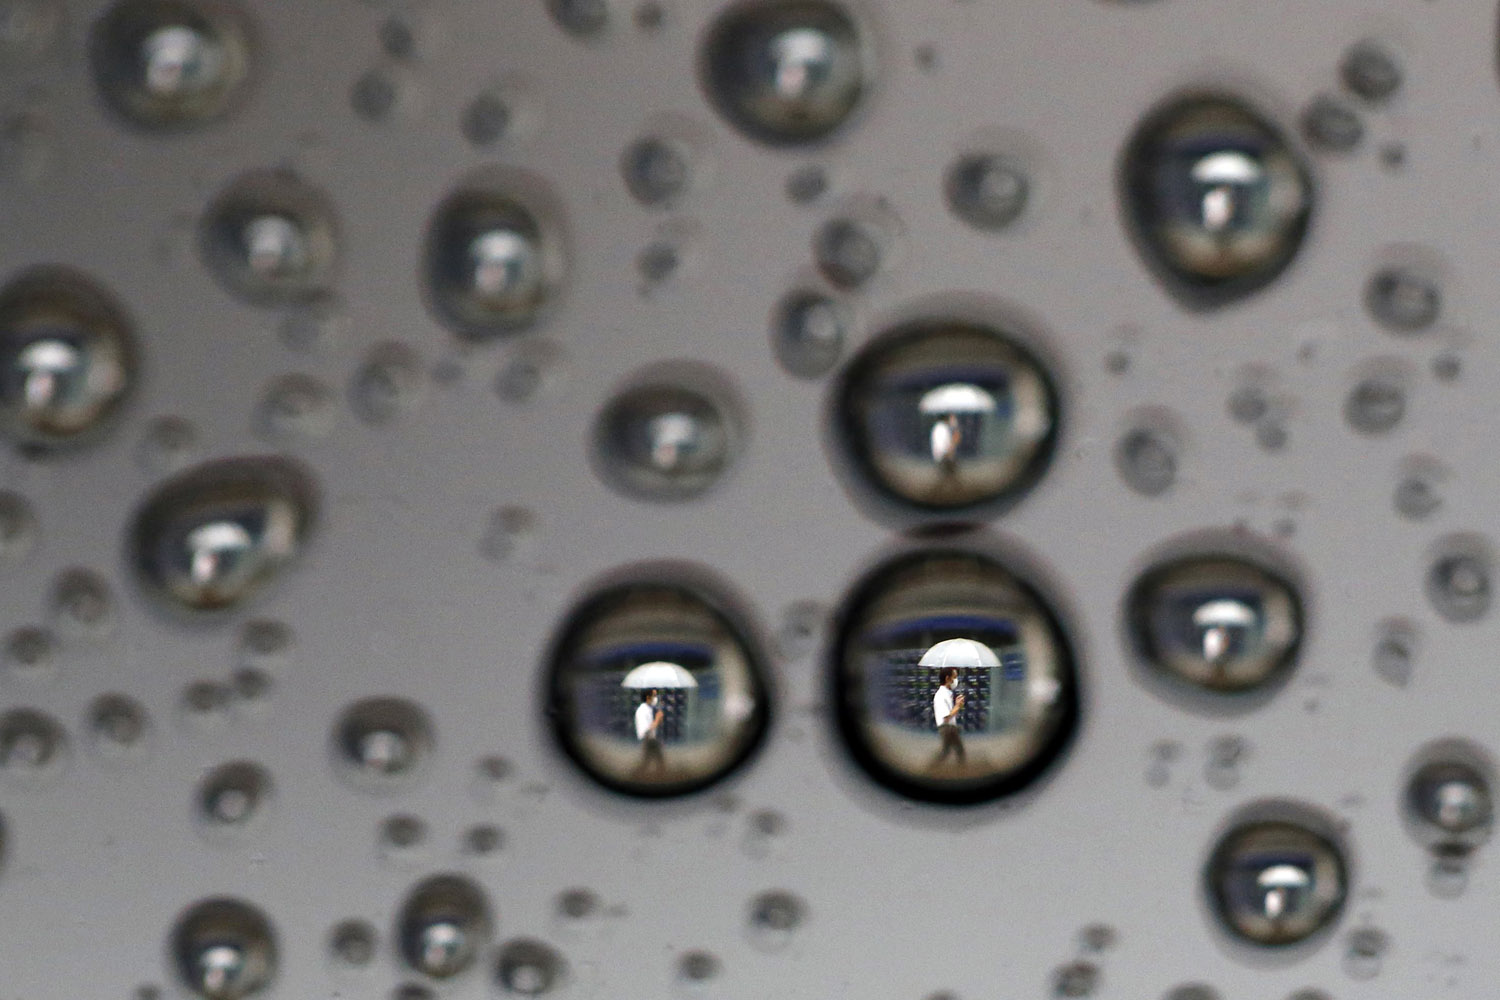 Oct. 2, 2013. Rain drops on a car window reflecting a man walking past a stock index board in Tokyo.